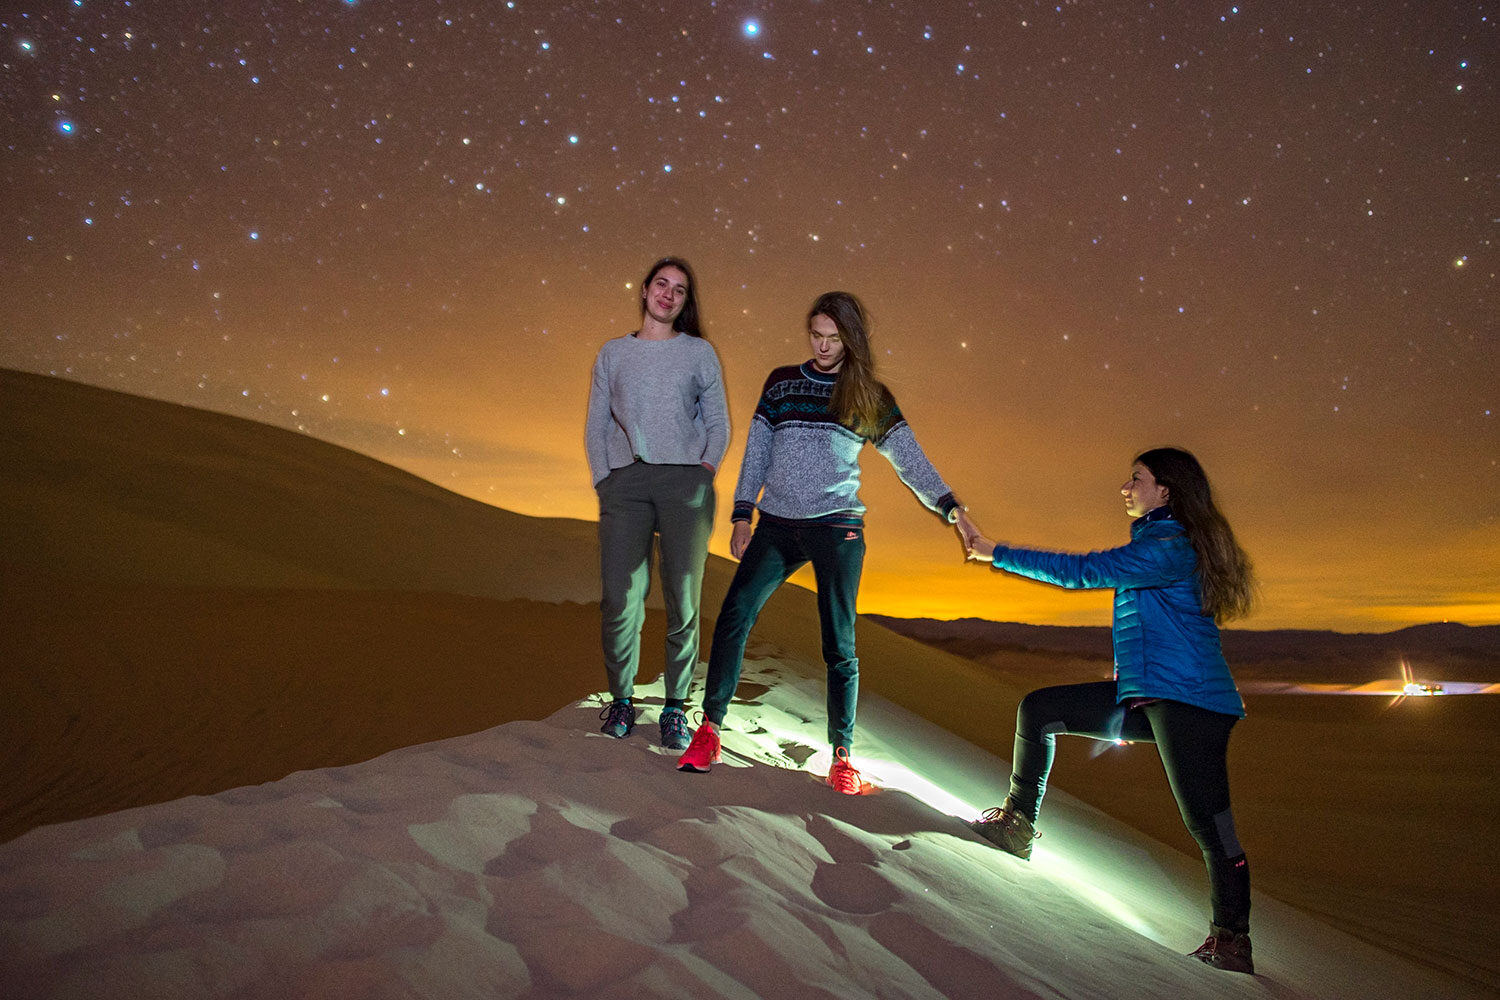 Three women on top of a sand dune under the stars. One women helping to pull another women up.